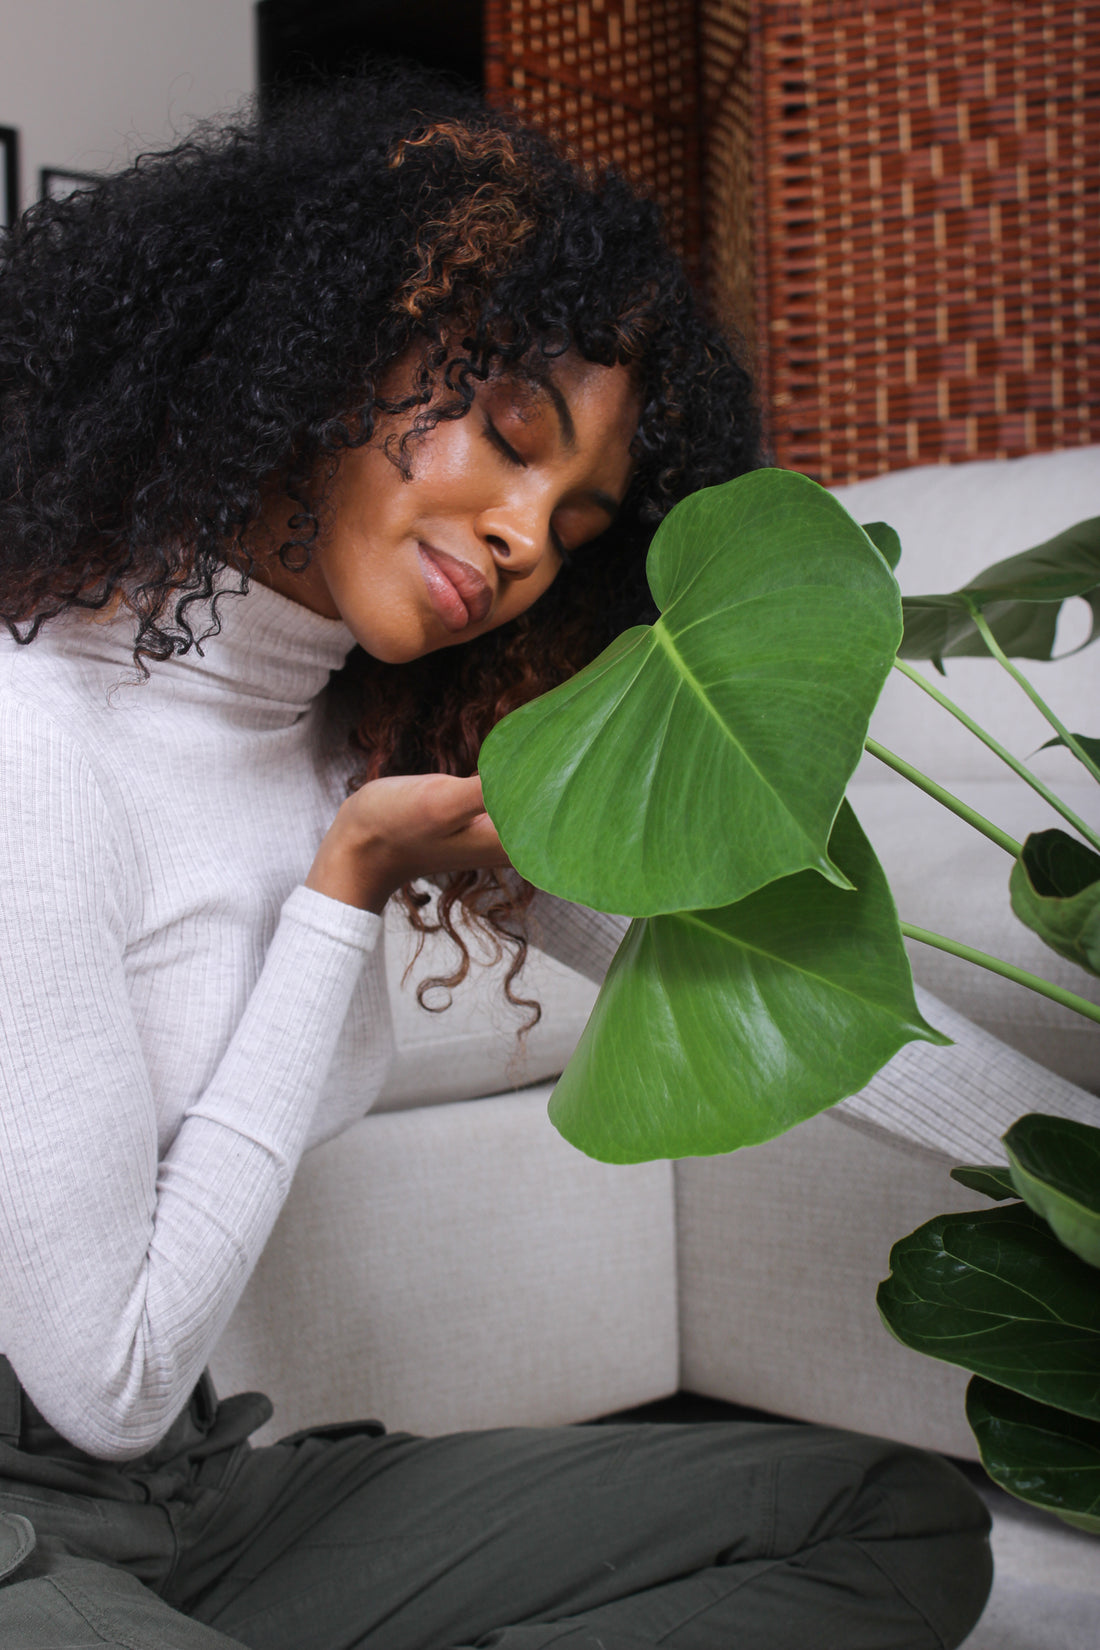 A woman is connecting to her houseplant with a smile on her face.